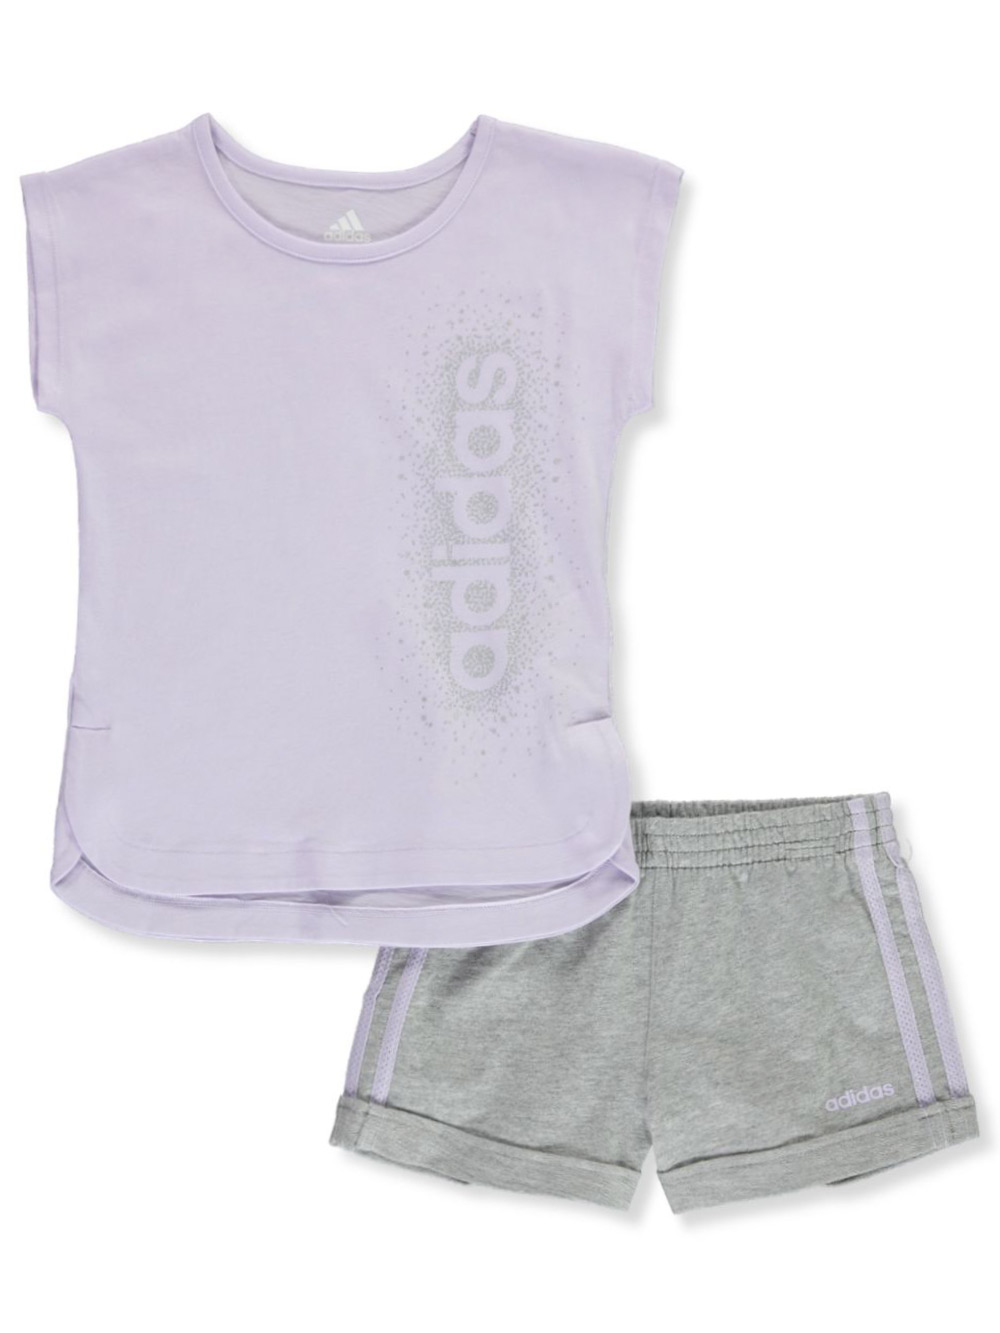 adidas girls outfit